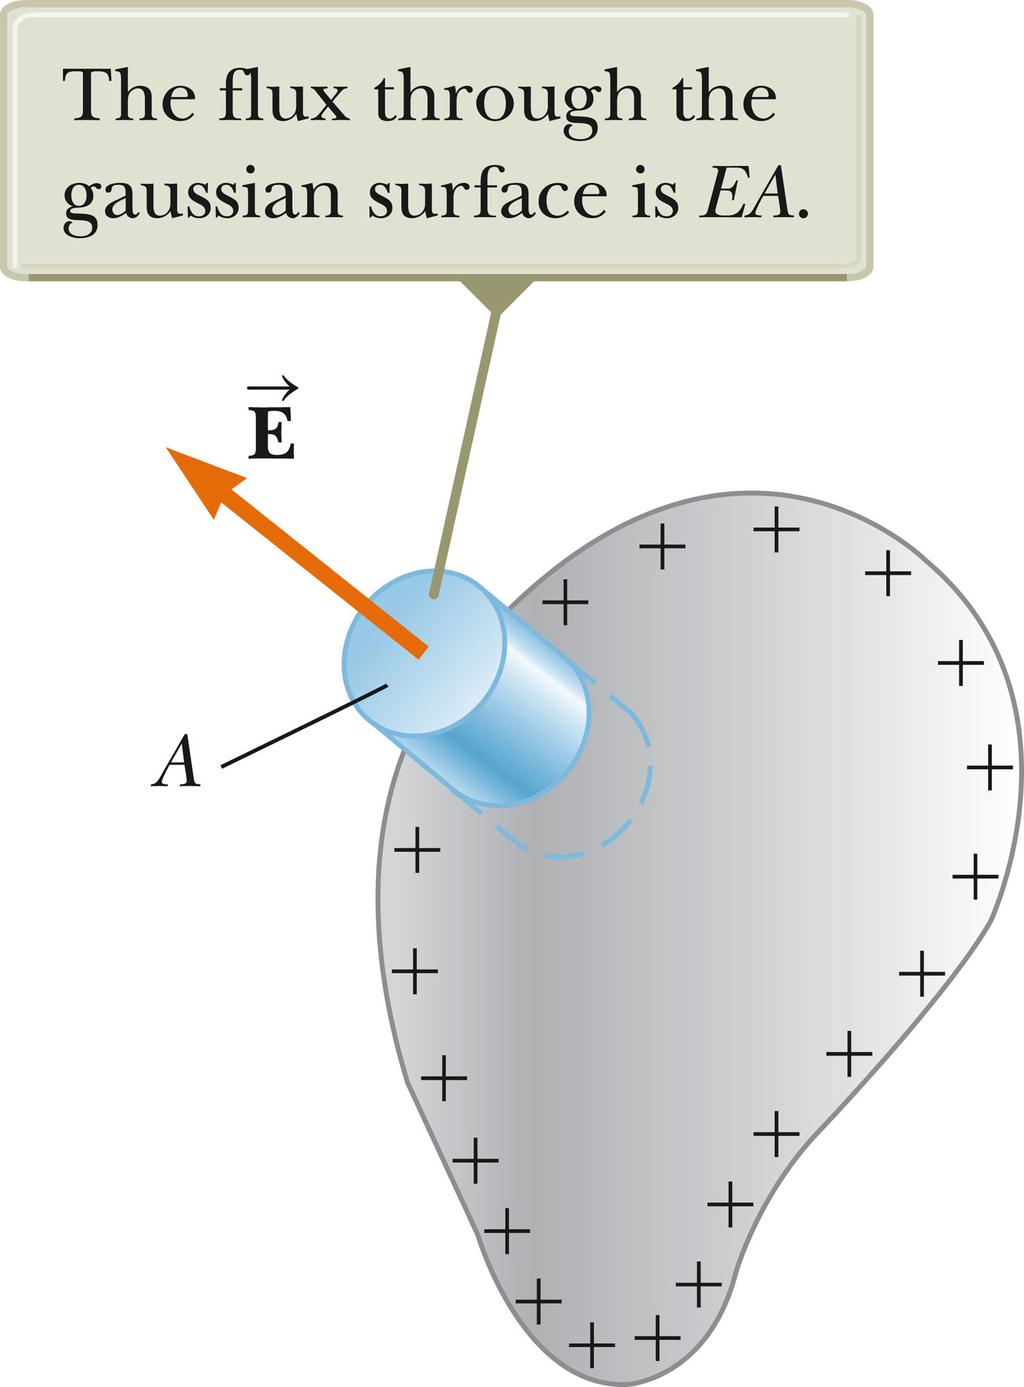 The electric force on the surface charge is balanced by a surface force on the atomic scale.